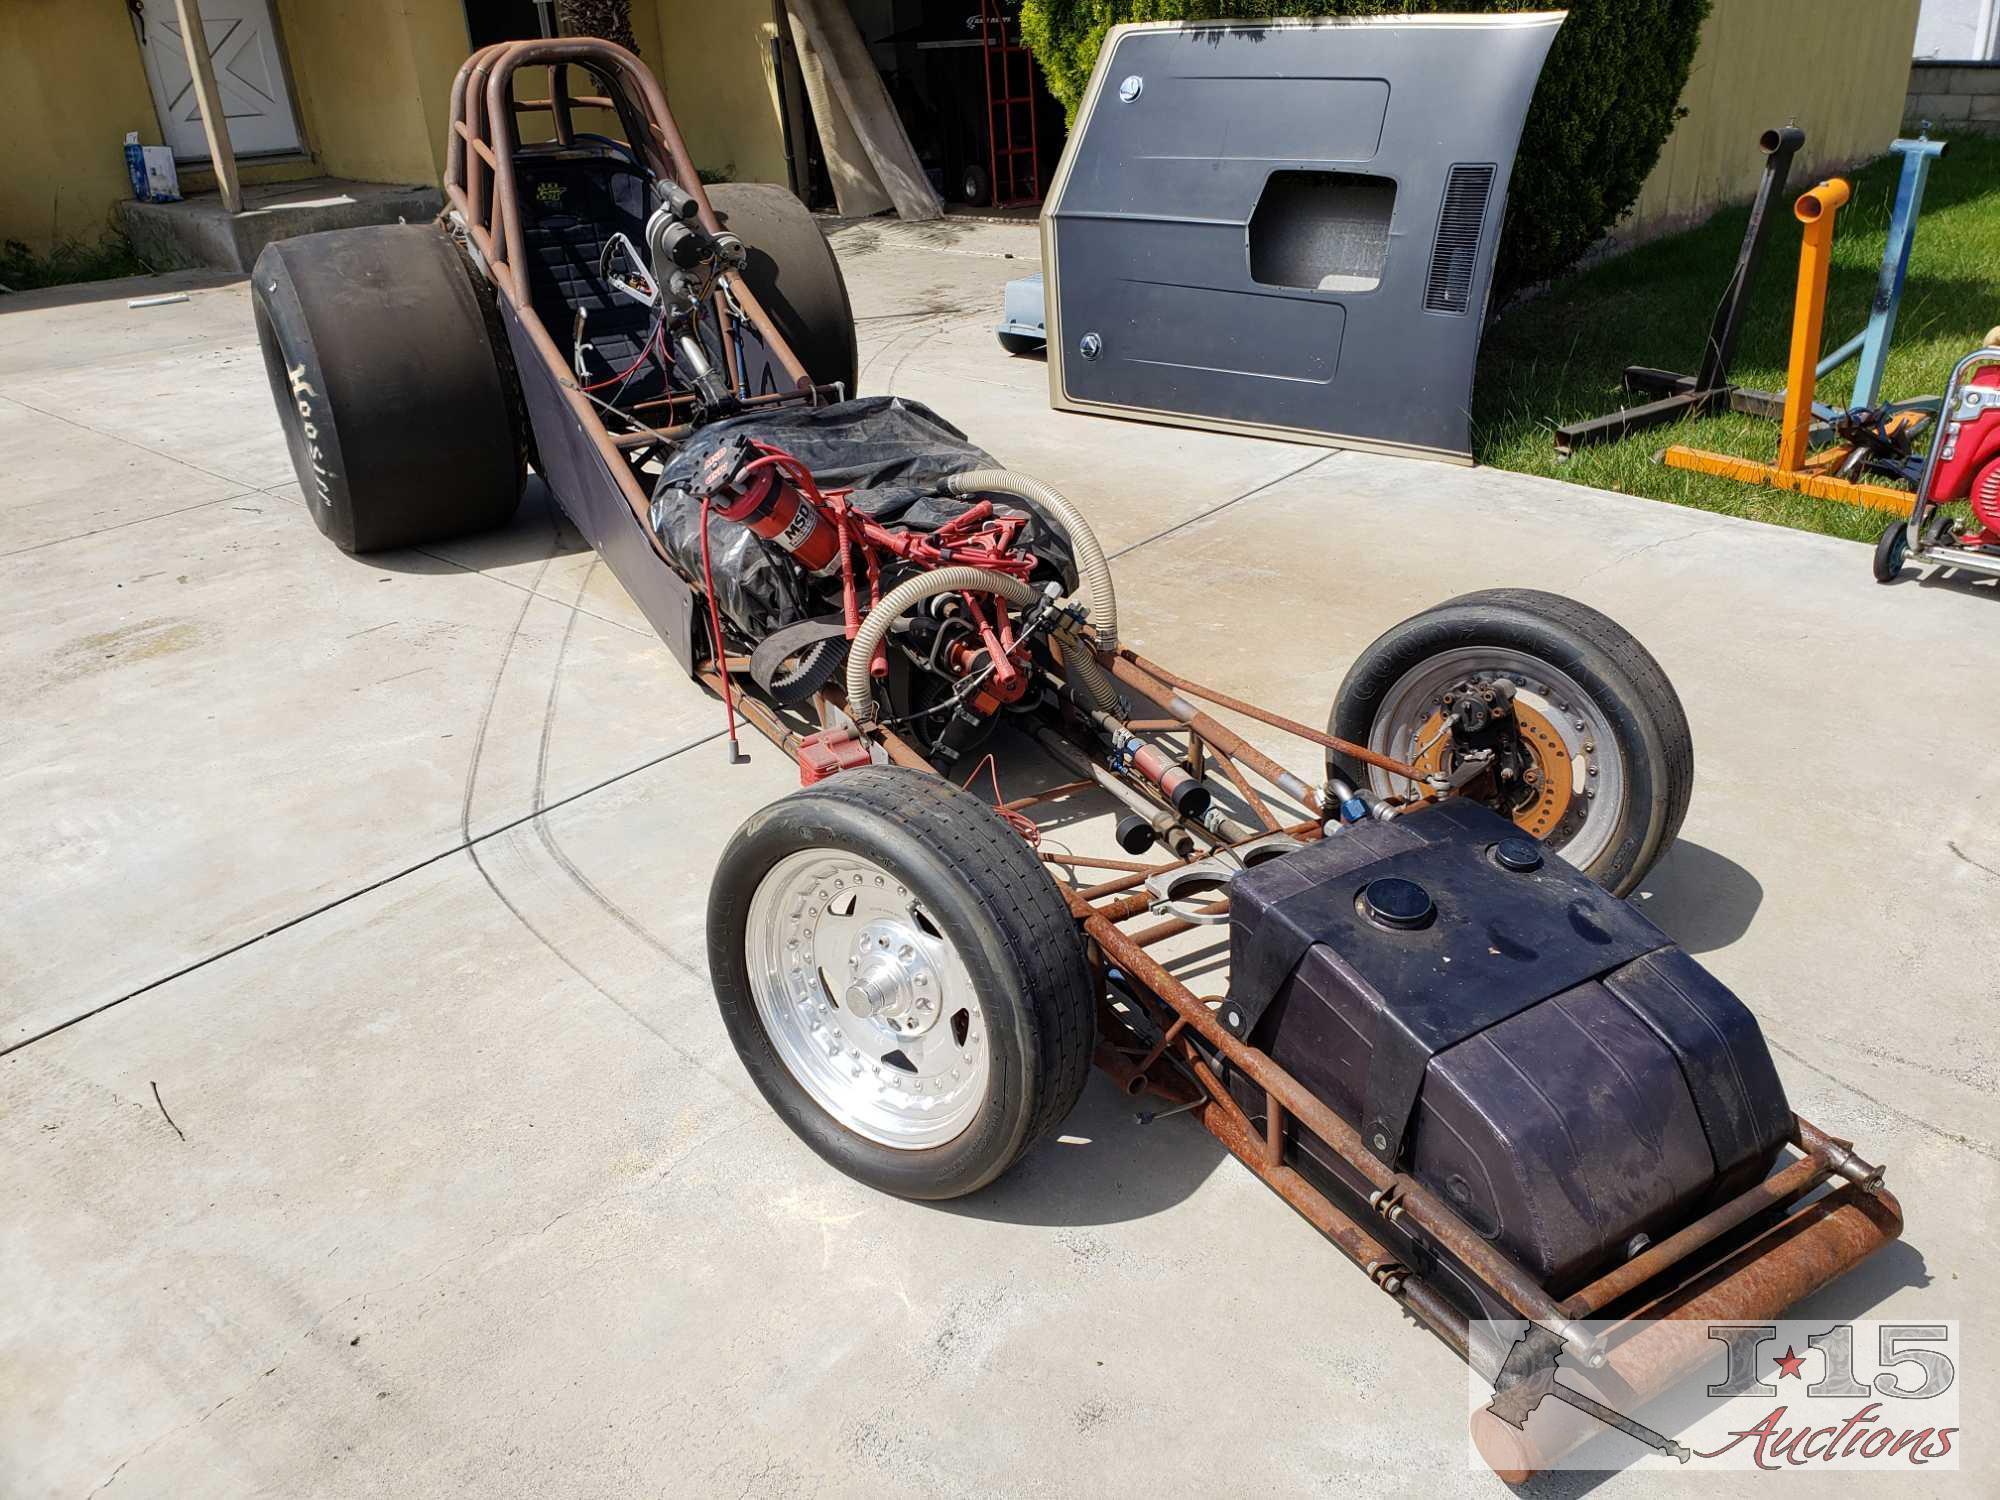 Funny Car Dragster with Fiberglass Body, BAE Aluminum Block, 1997 Ken Mooers Chassis, New Photos!